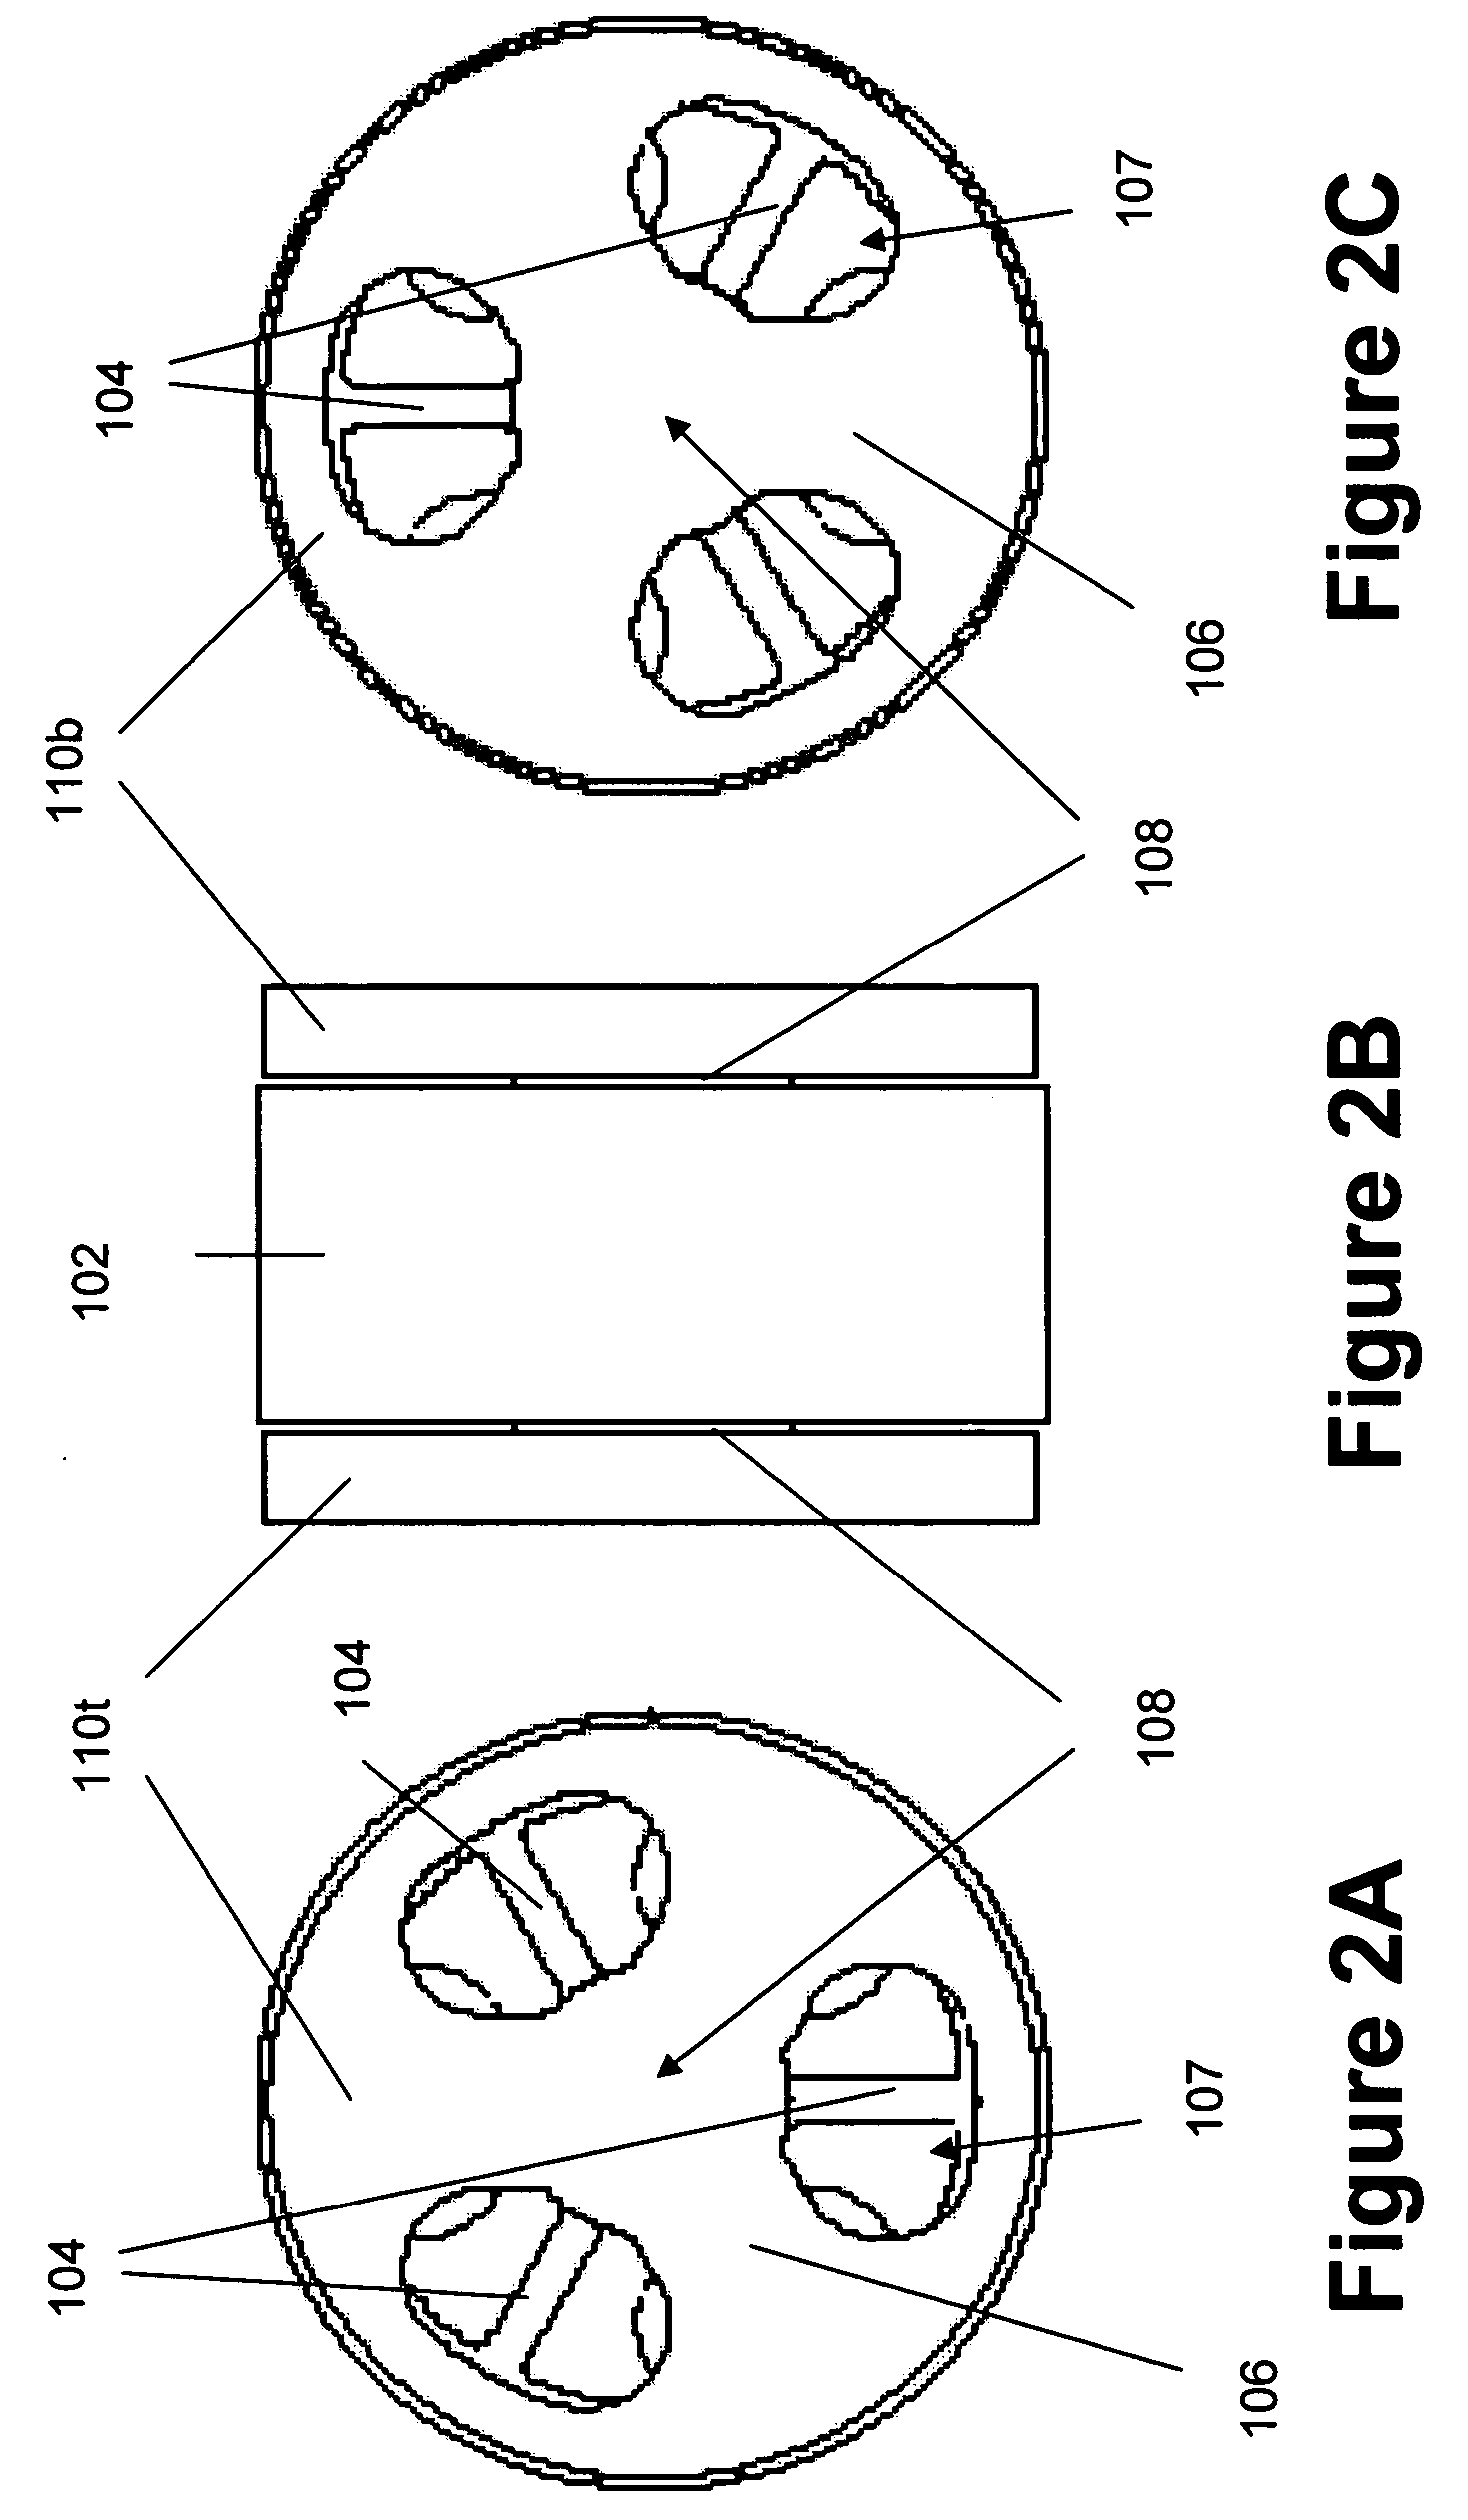 Monolithic rotational flexure bearing and methods of manufacture